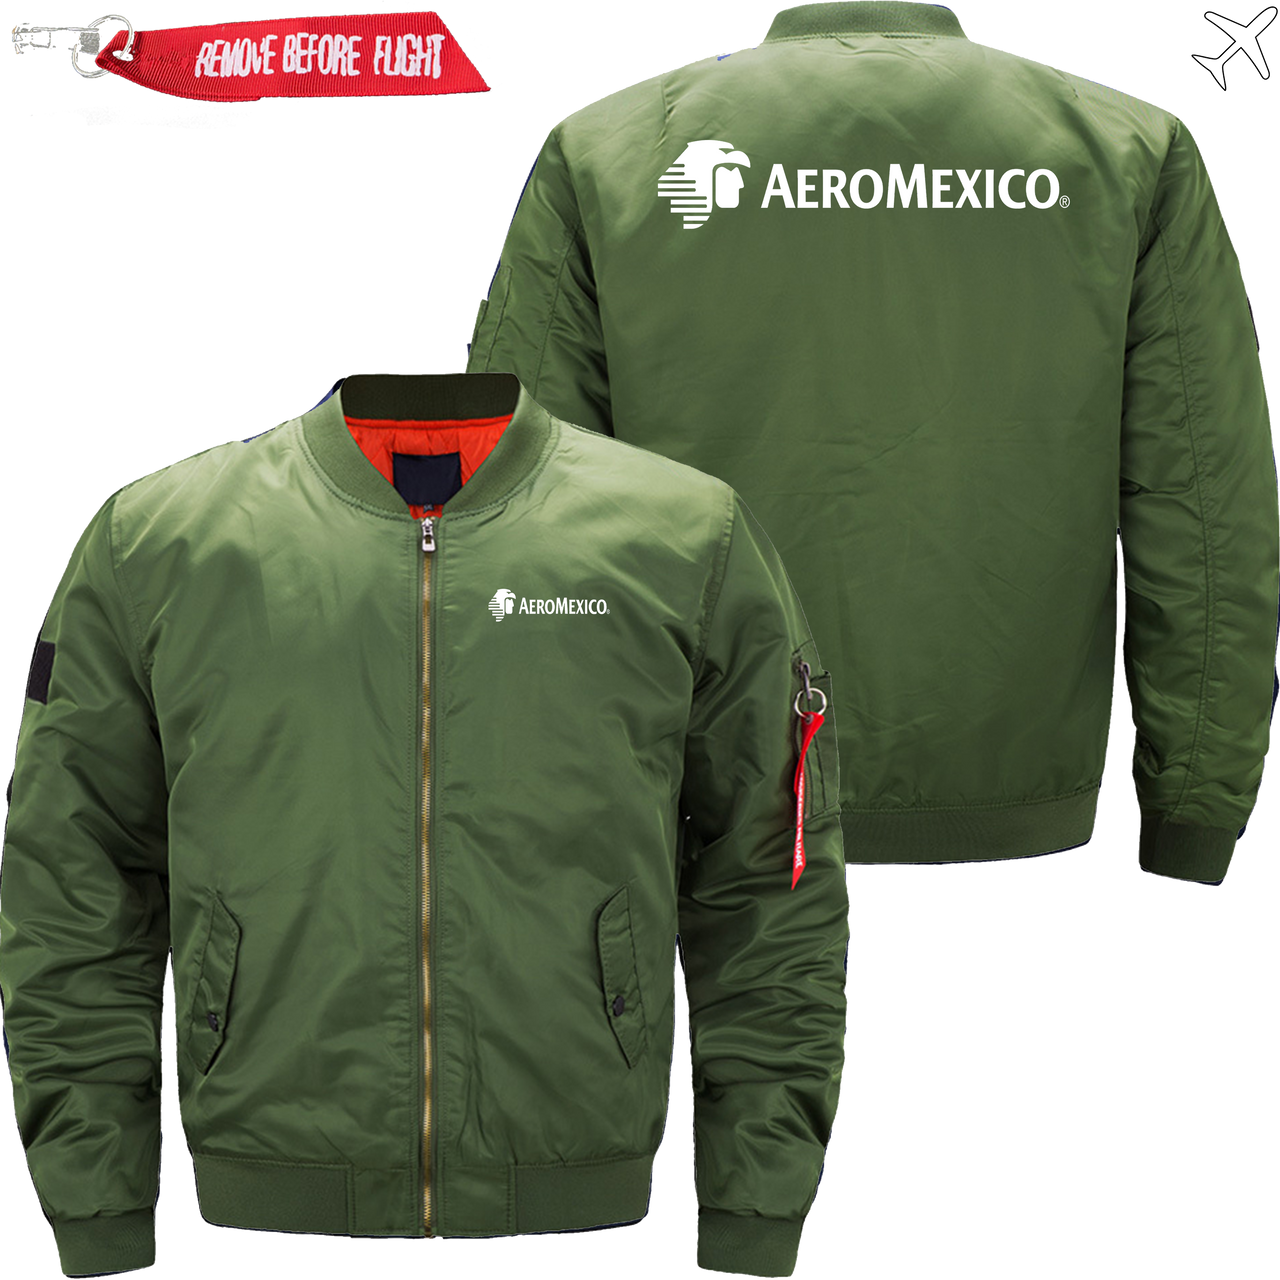 MEXICO AIRLINES MA1 JACKET THE AV8R